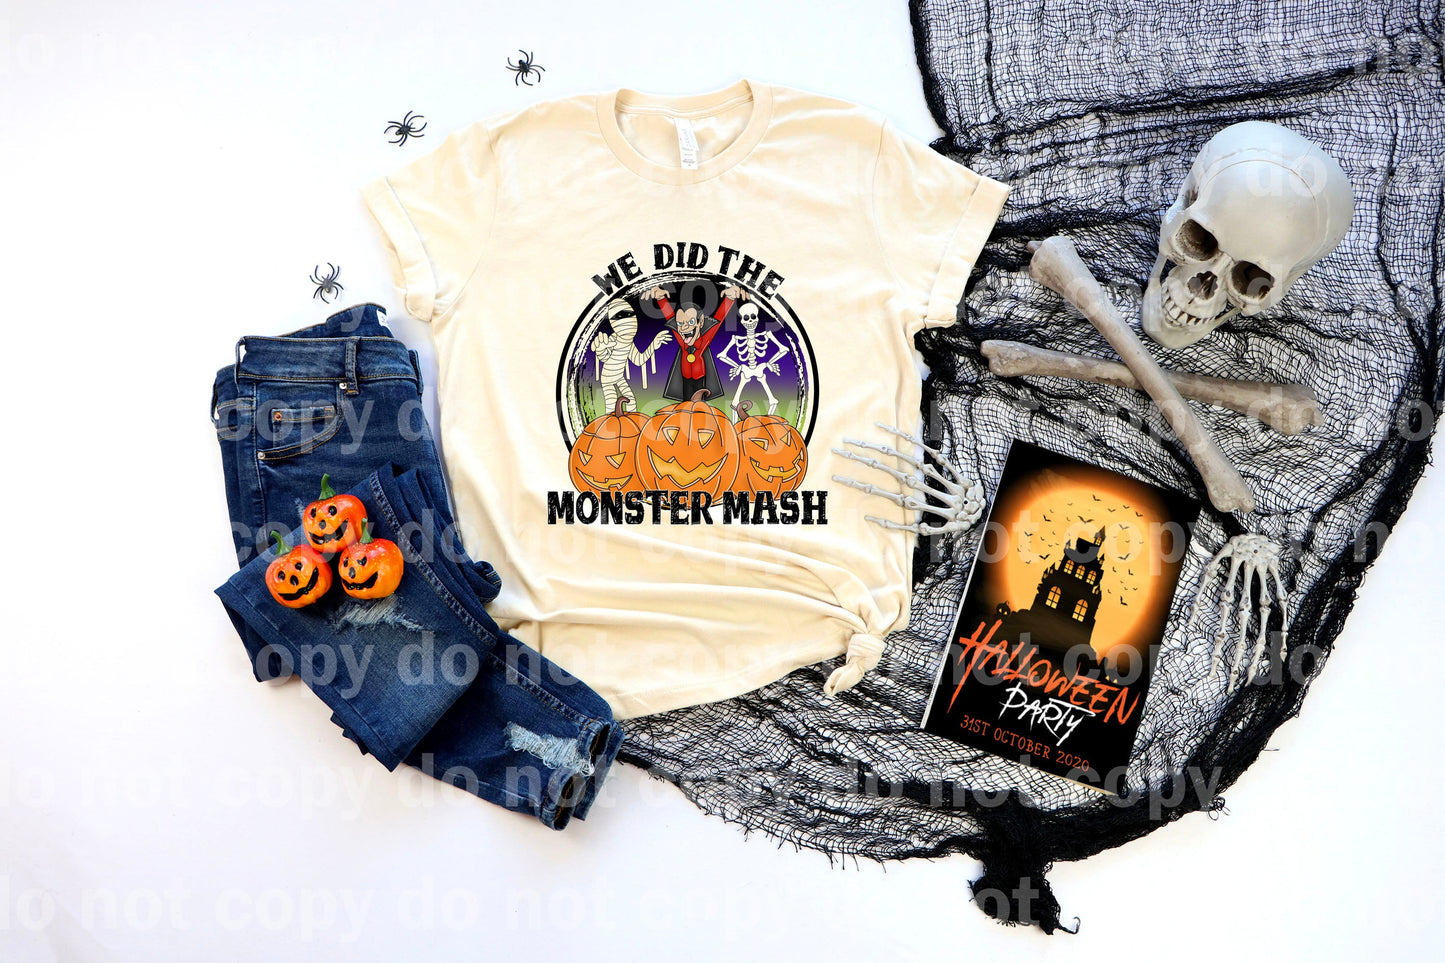 We Did The Monster Mash Dream Print or Sublimation Print